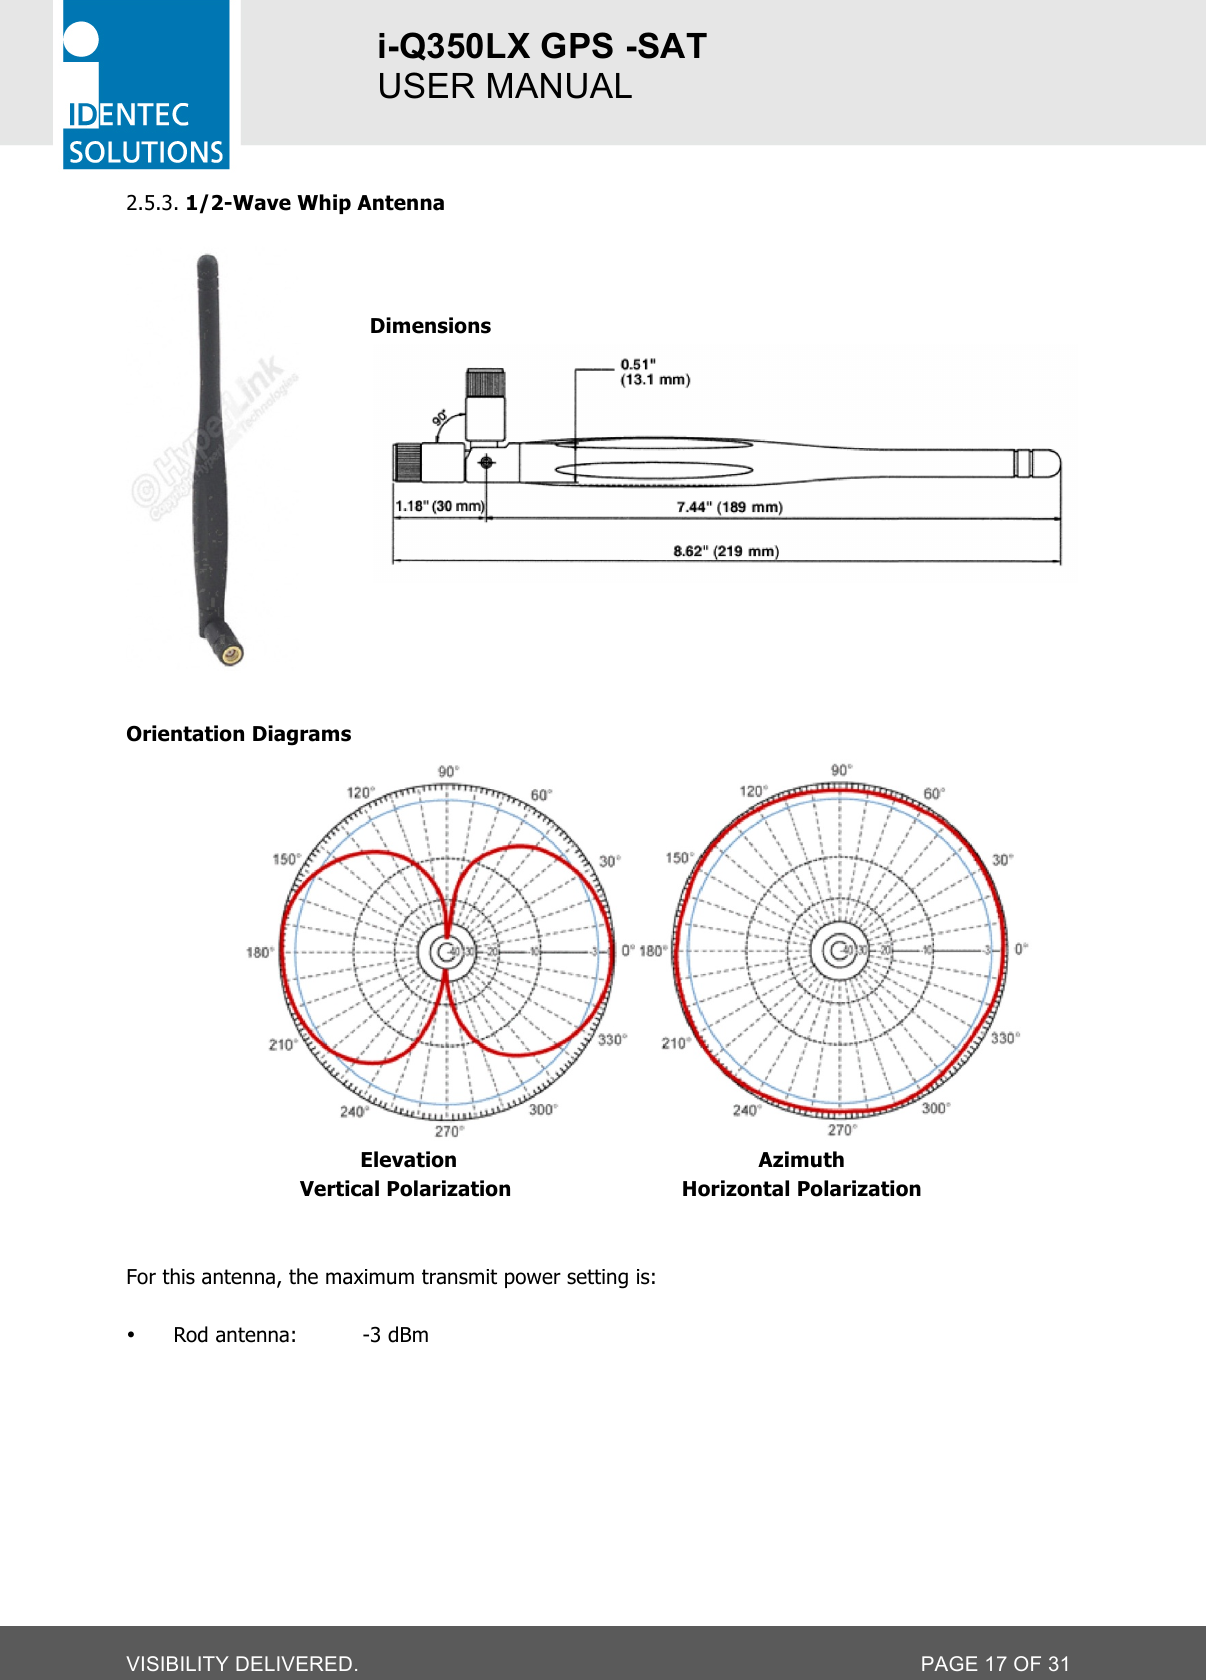 i-Q350LX GPS -SAT  USER MANUAL  VISIBILITY DELIVERED.  PAGE 17 OF 31 2.5.3. 1/2-Wave Whip Antenna     Dimensions    Orientation Diagrams                         Elevation                        Azimuth                       Vertical Polarization                        Horizontal Polarization   For this antenna, the maximum transmit power setting is:  • Rod antenna:    -3 dBm      